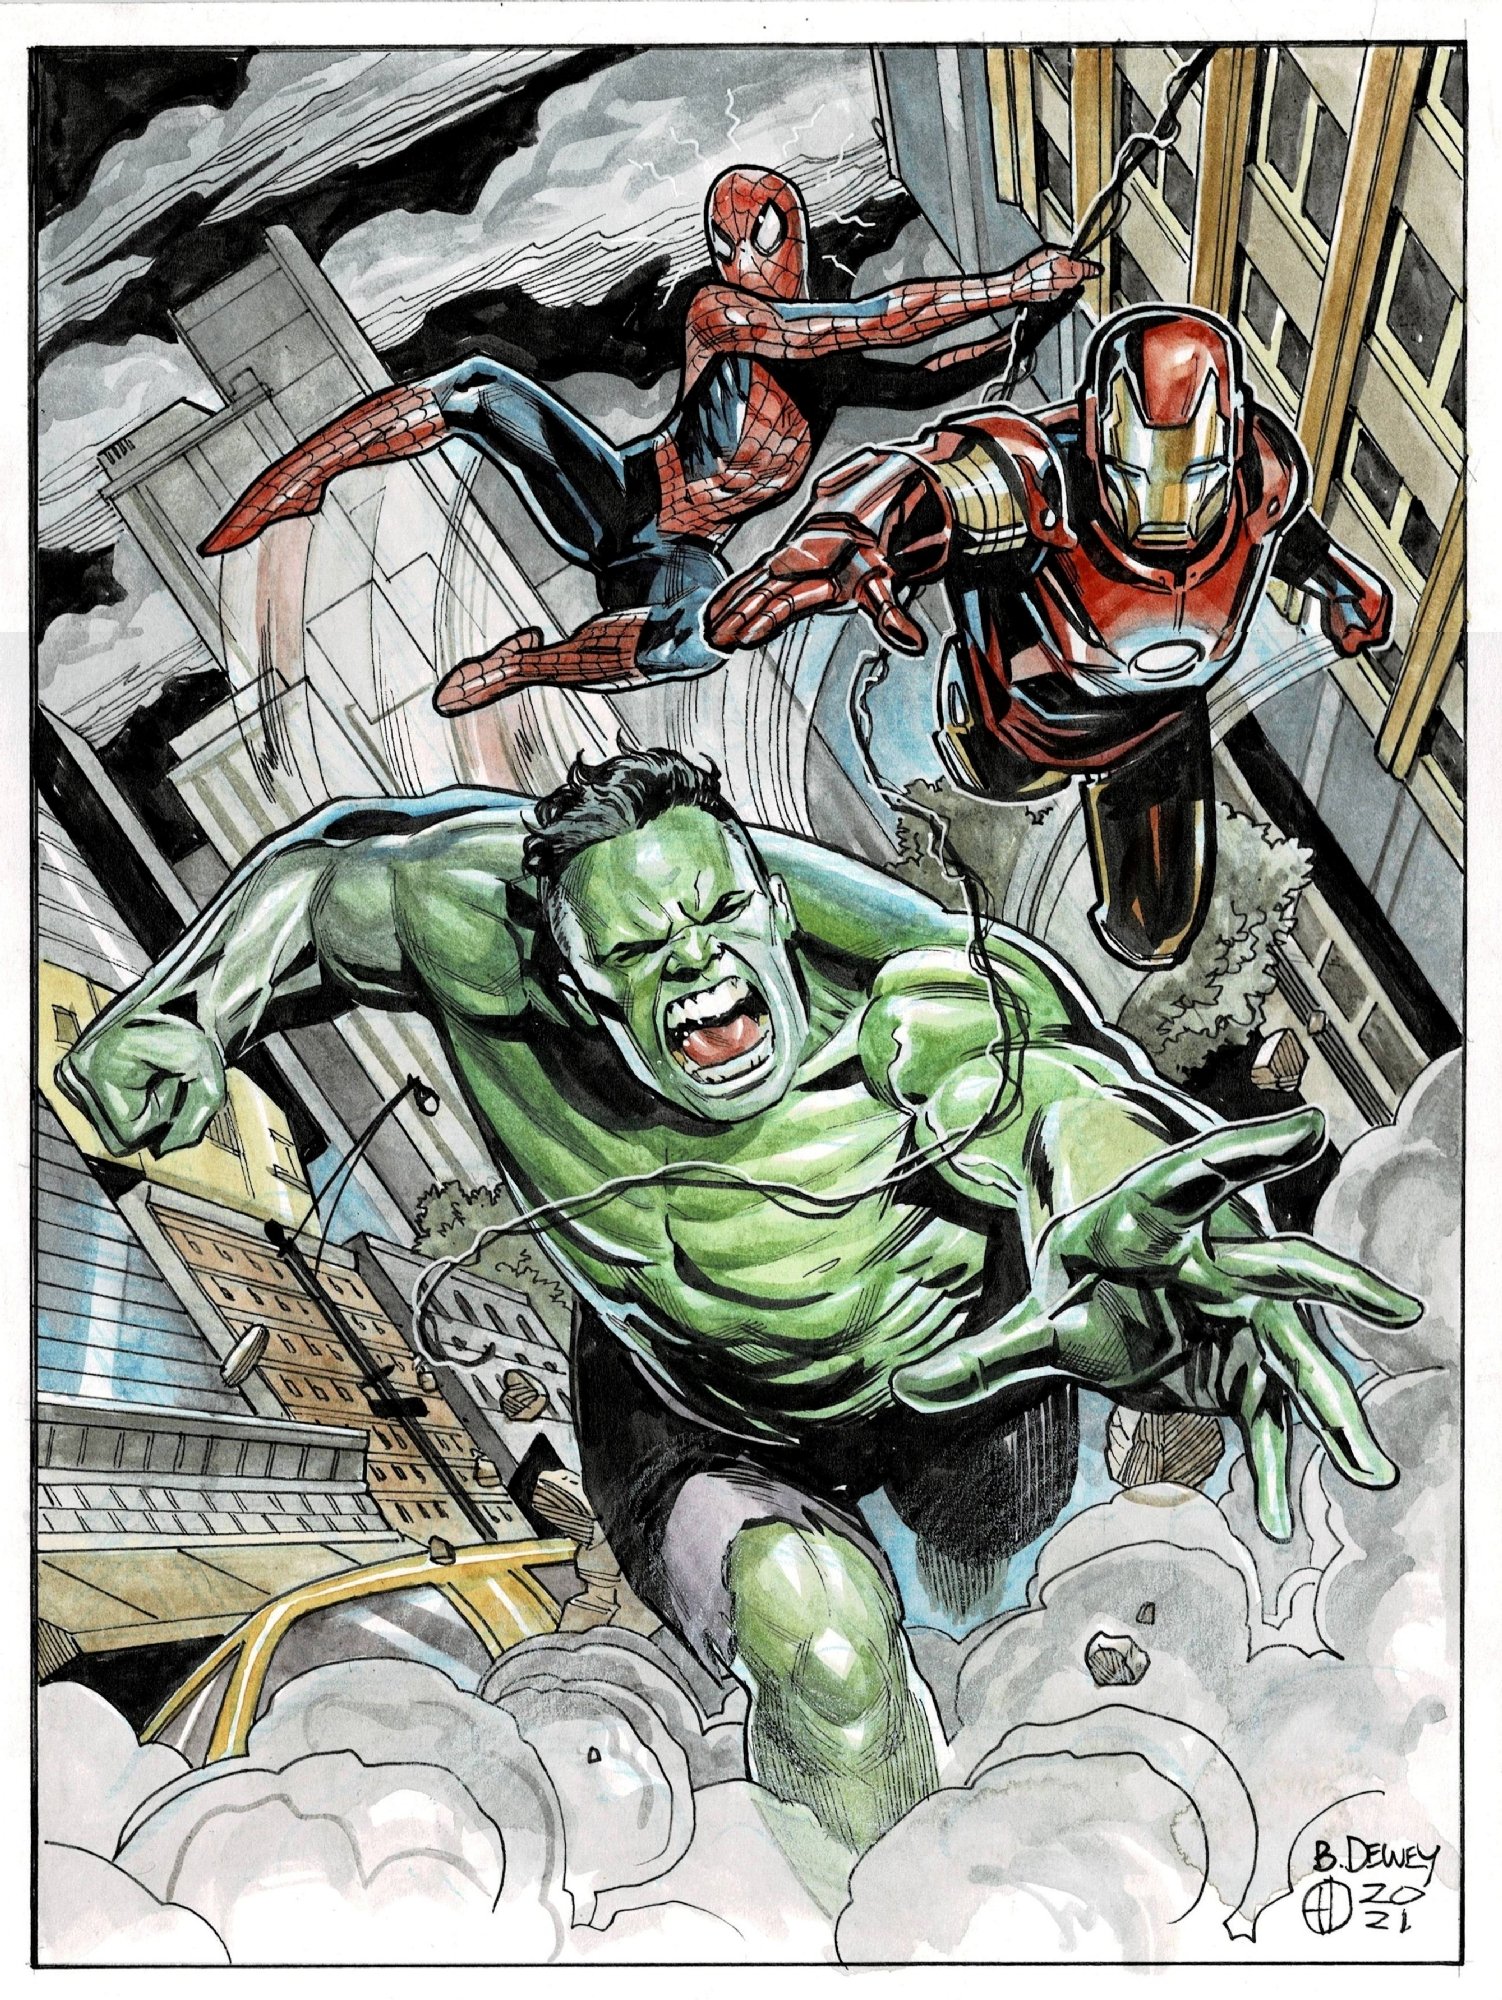 Spider-man, Iron Man and the Hulk - color gouache commission by Benjamiin  Dewey , in Ben Vandewalle's Covers and/or splash pages Comic Art Gallery  Room